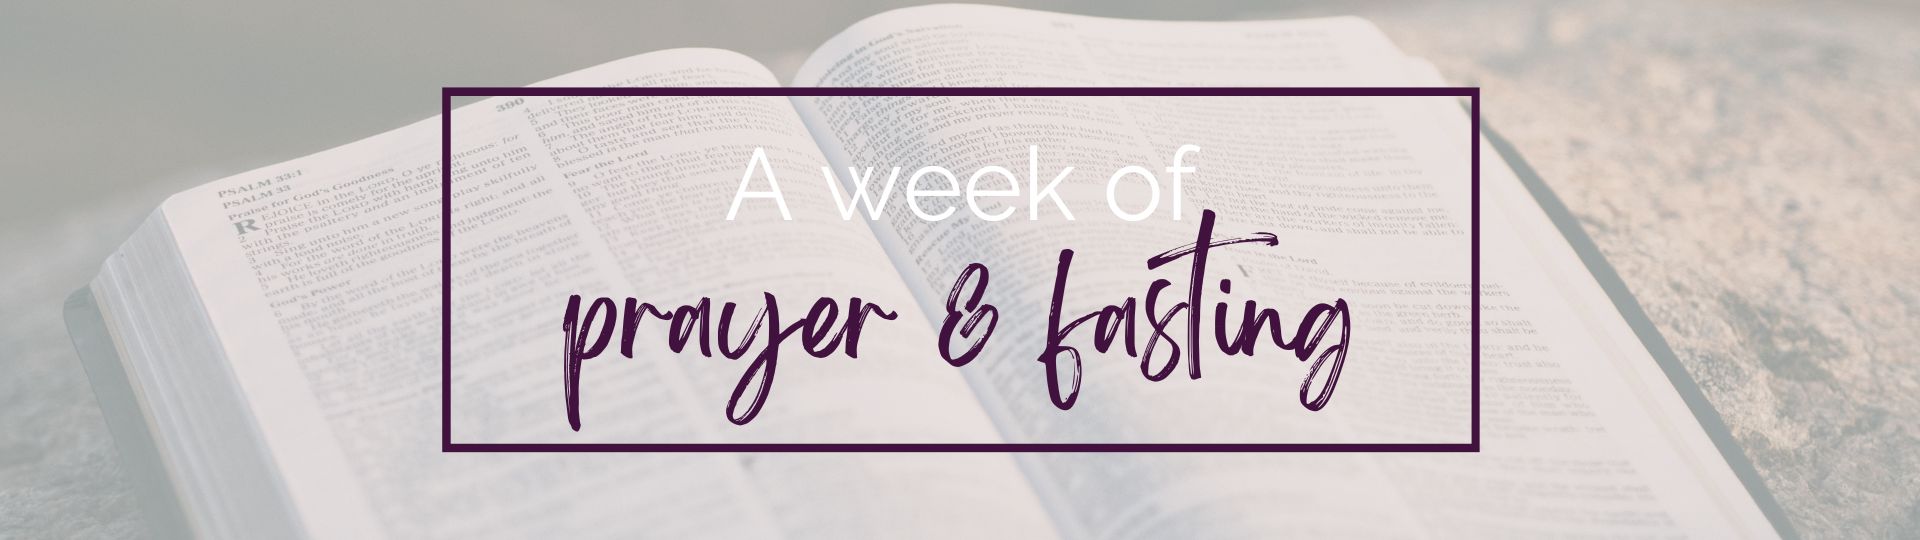 A week of prayer and fasting